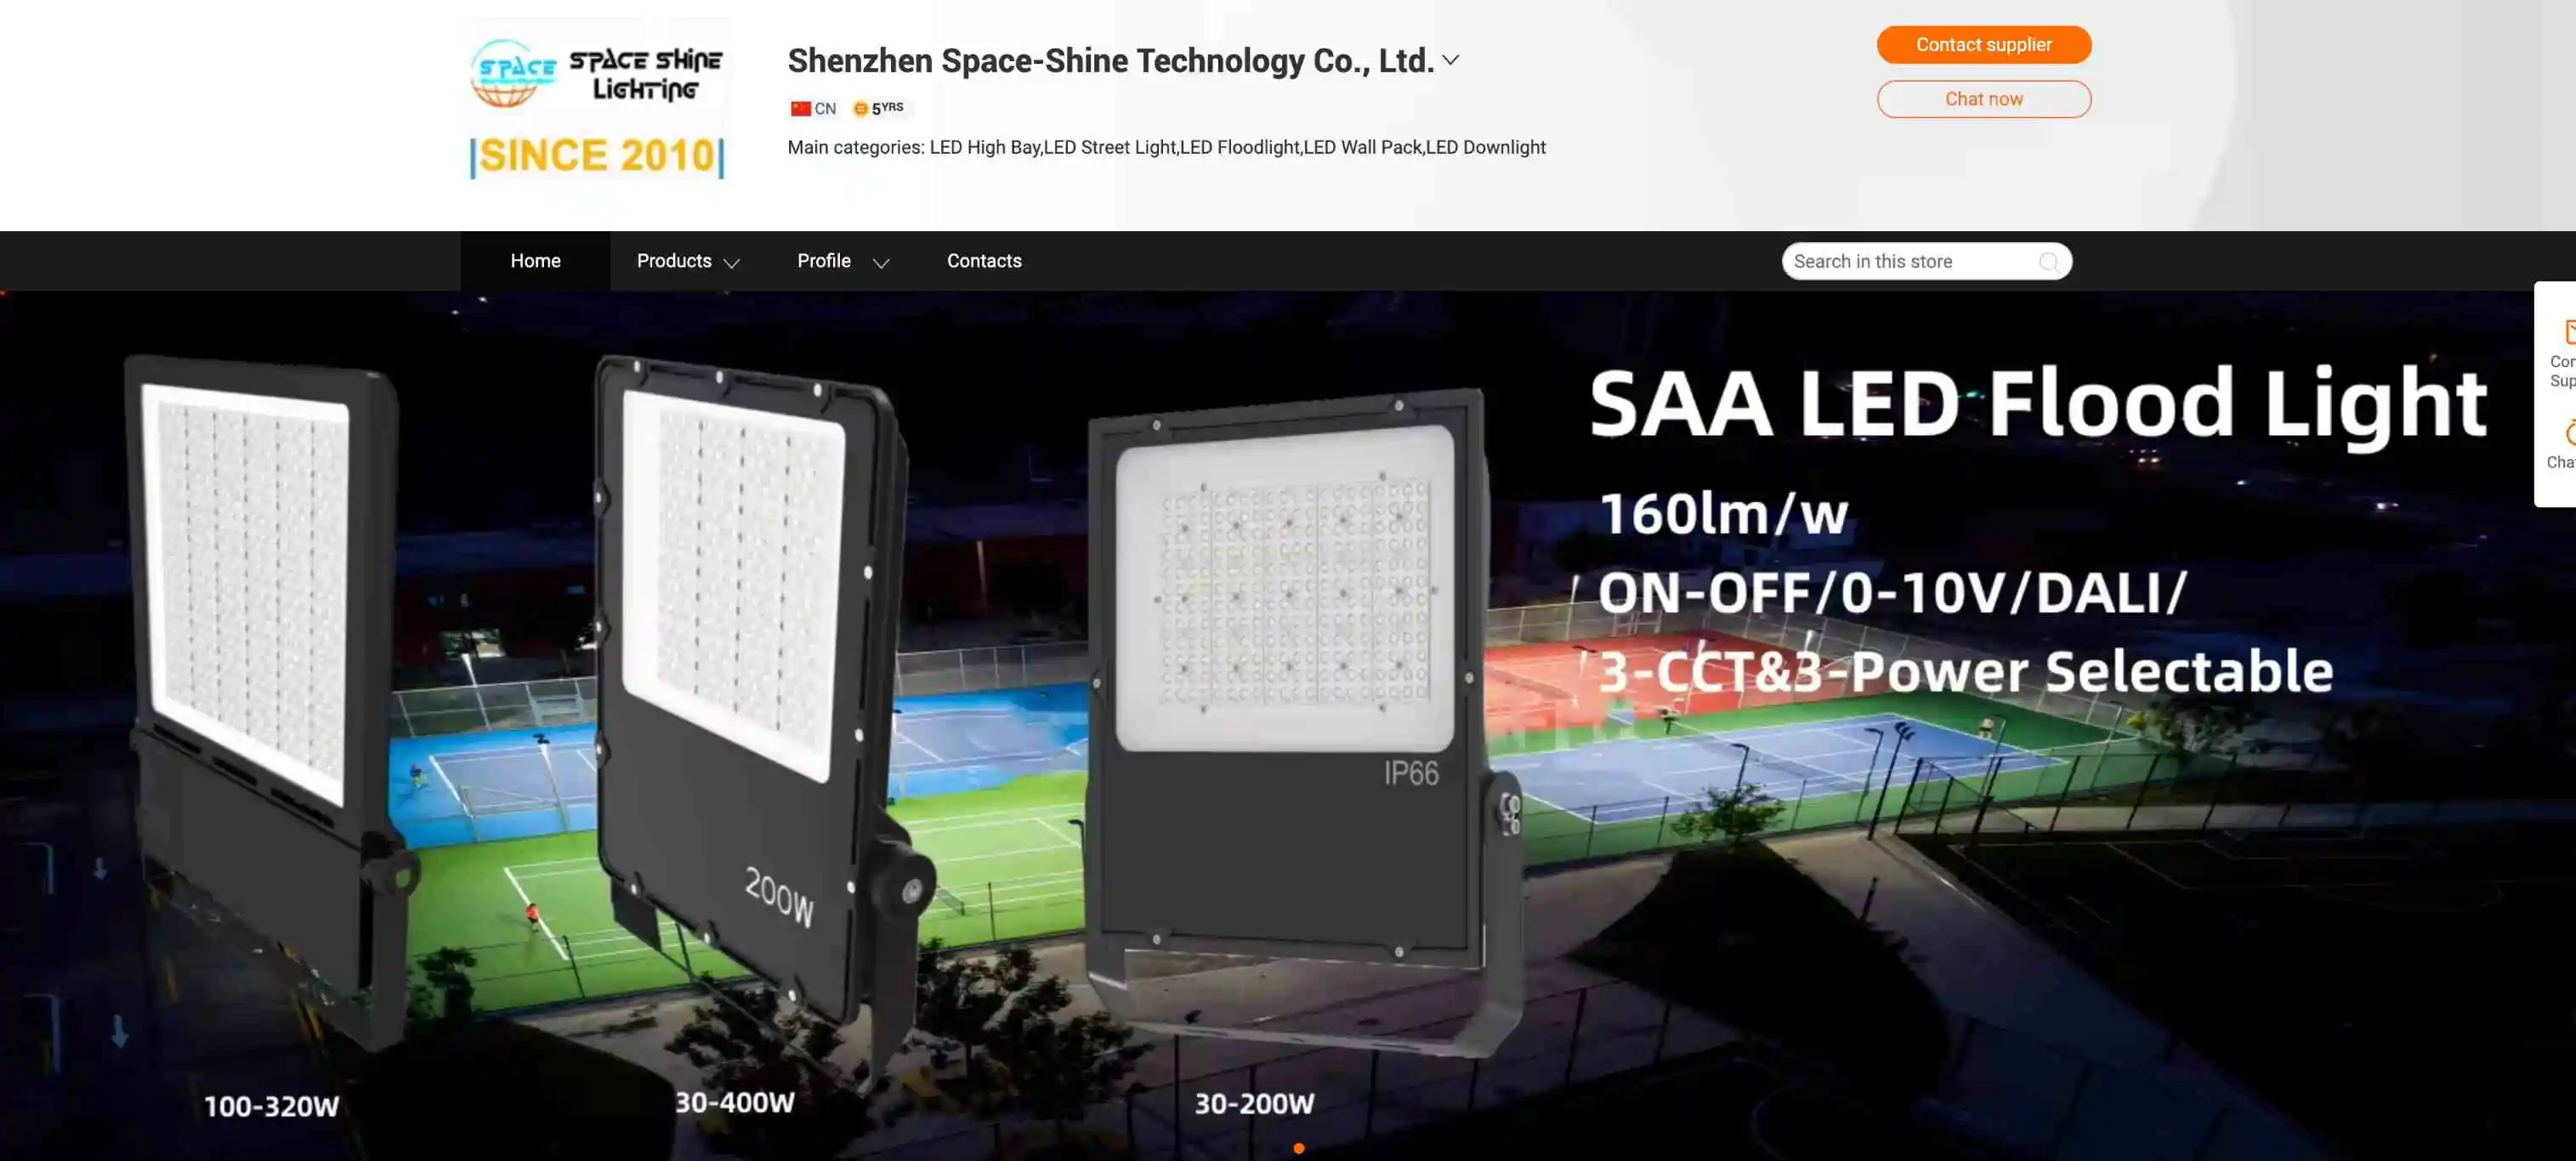 Website for SAA LED flood light by Space shine Technology High quality lighting solution for various applications